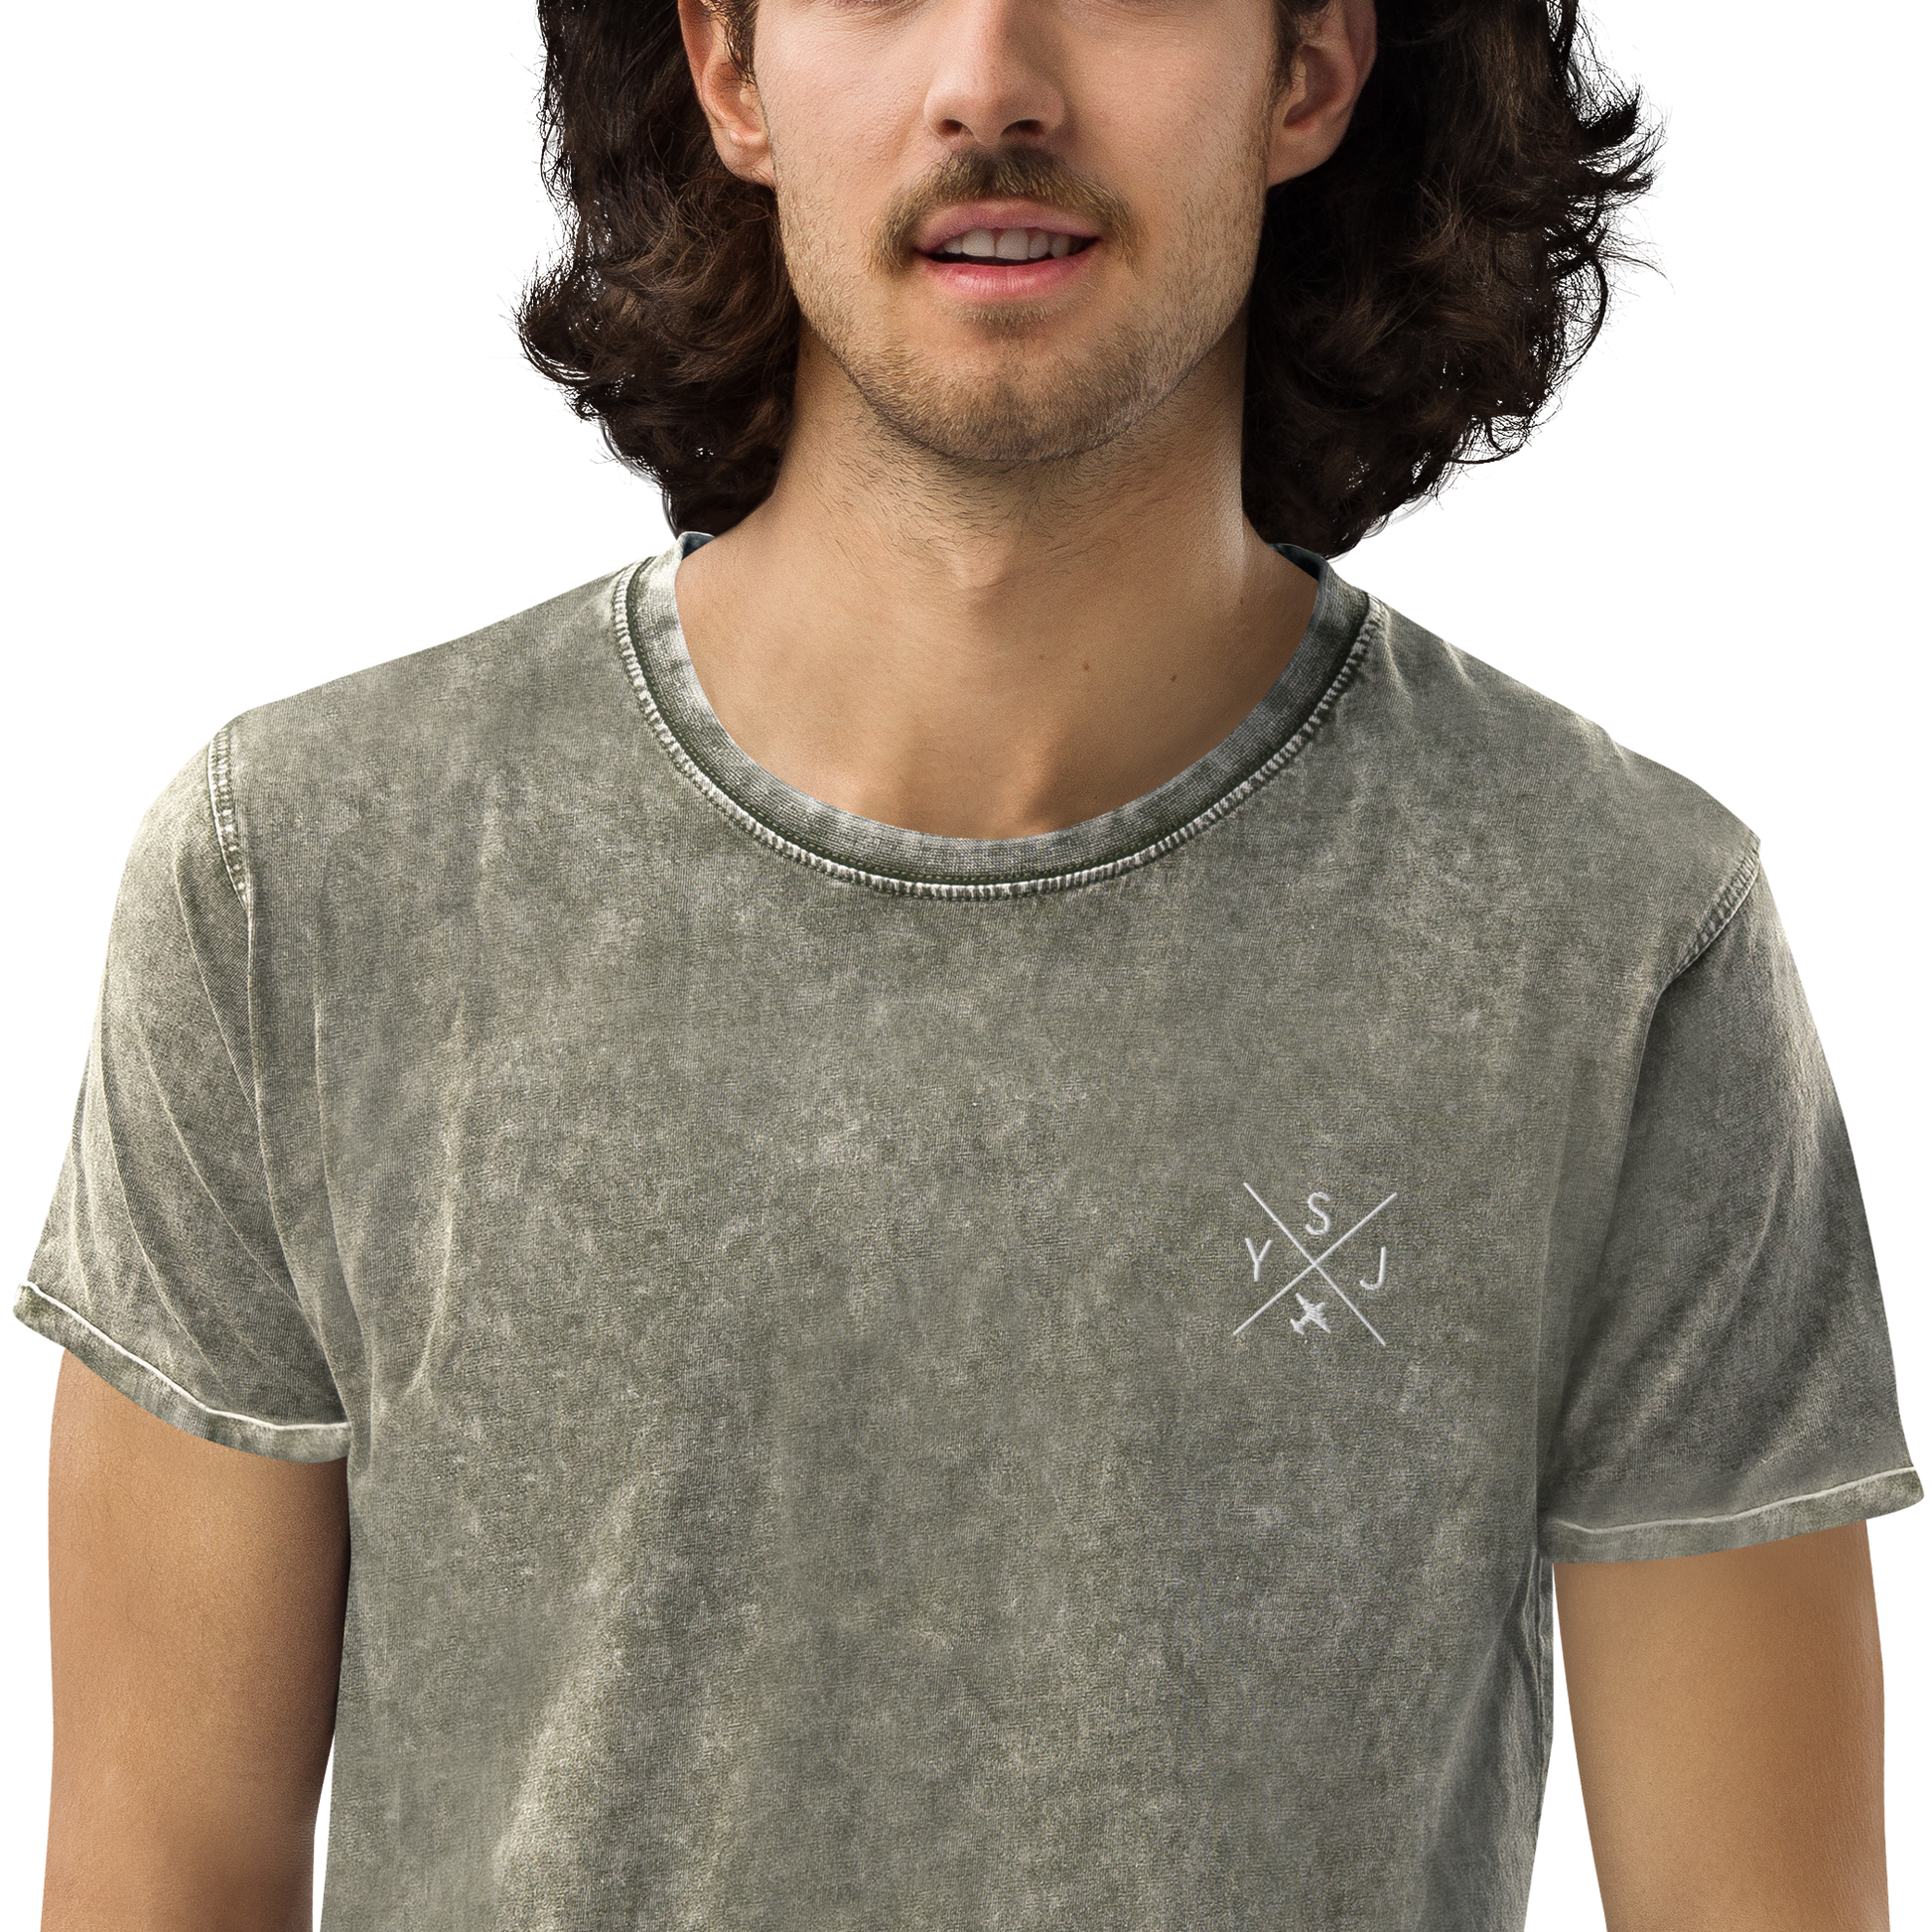 YHM Designs - YSJ Saint John Denim T-Shirt - Crossed-X Design with Airport Code and Vintage Propliner - White Embroidery - Image 11